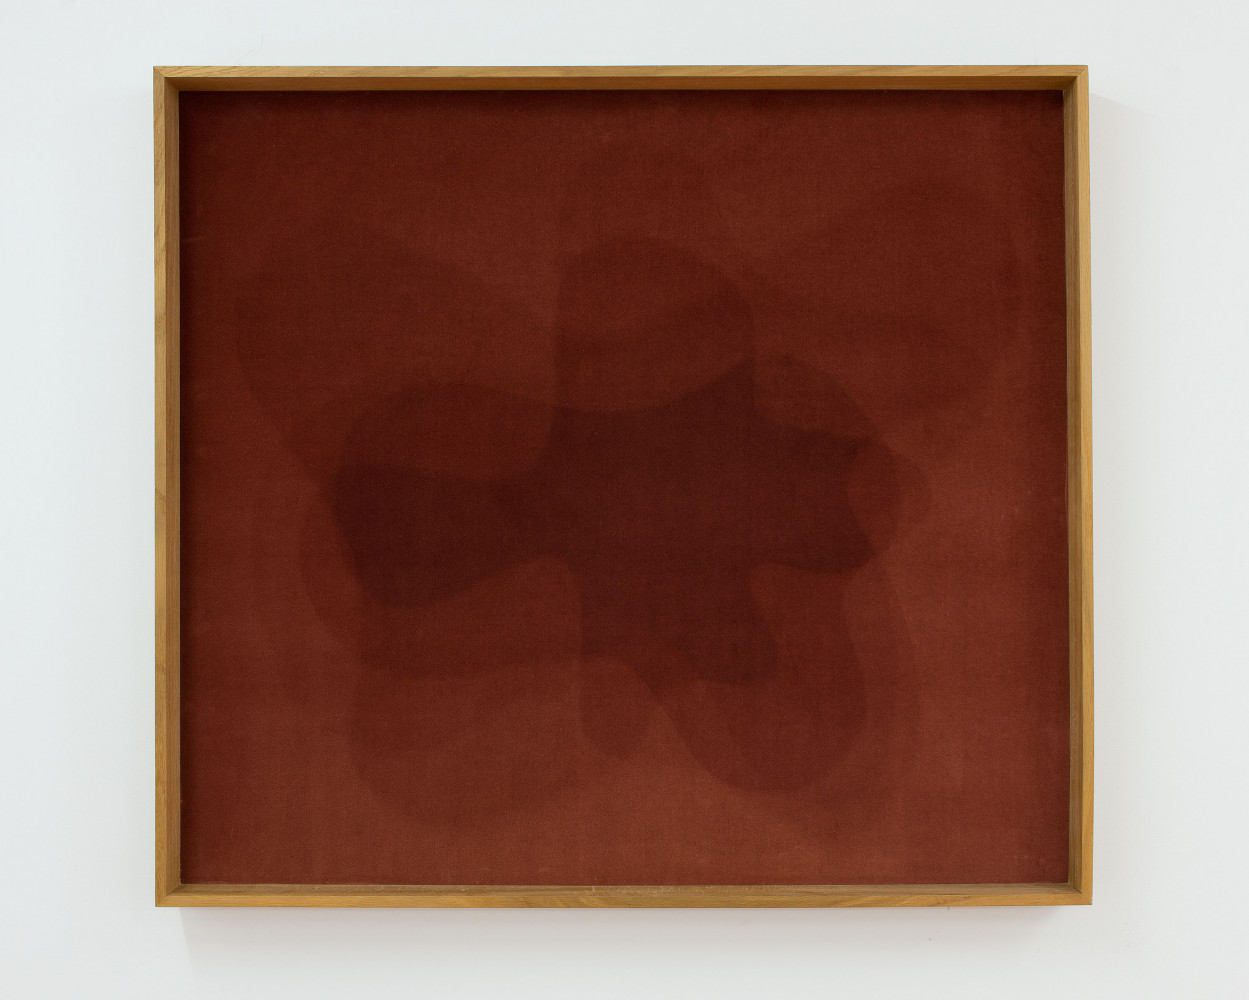 velvet on wooden board, wooden frame 85 x 95 x 7 cm; courtesy the artist and Pola Magnetyczne Gallery, Warsaw